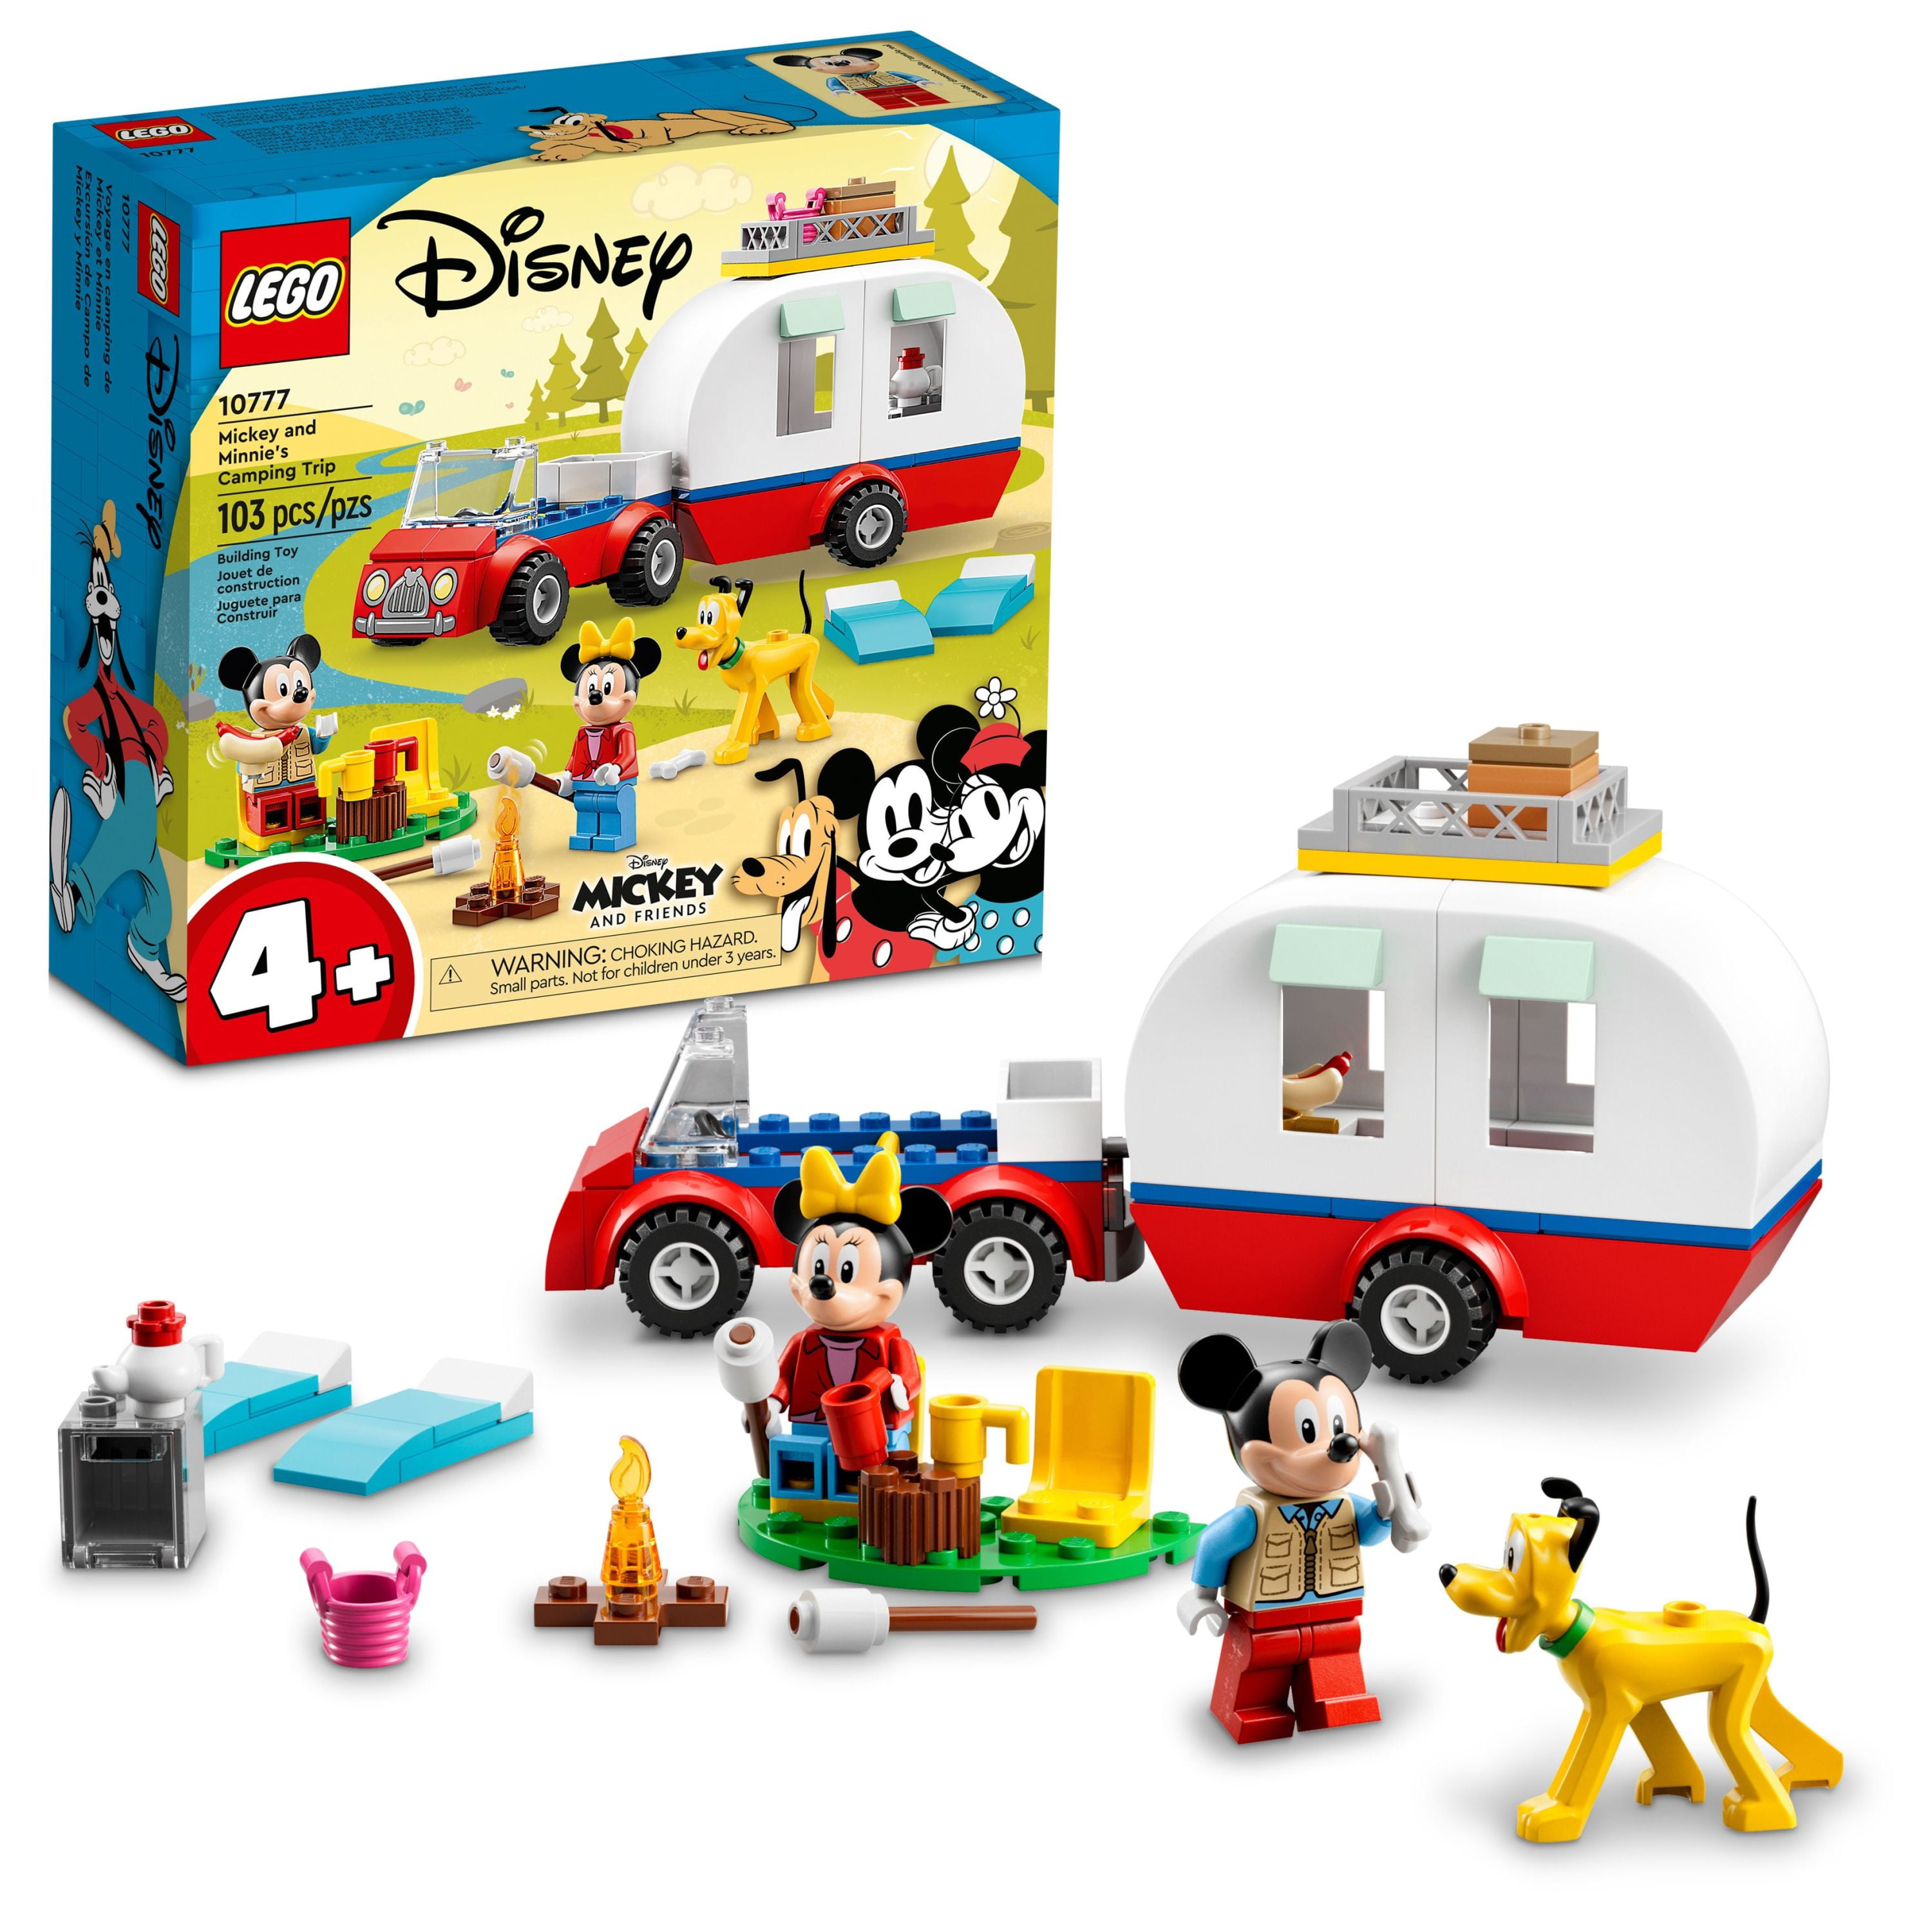 LEGO Disney Mickey Mouse and Minnie Mouse's Camping Building Toy with Camper Van, Car & Figure, for Kids 4 Plus Years Old - Walmart.com